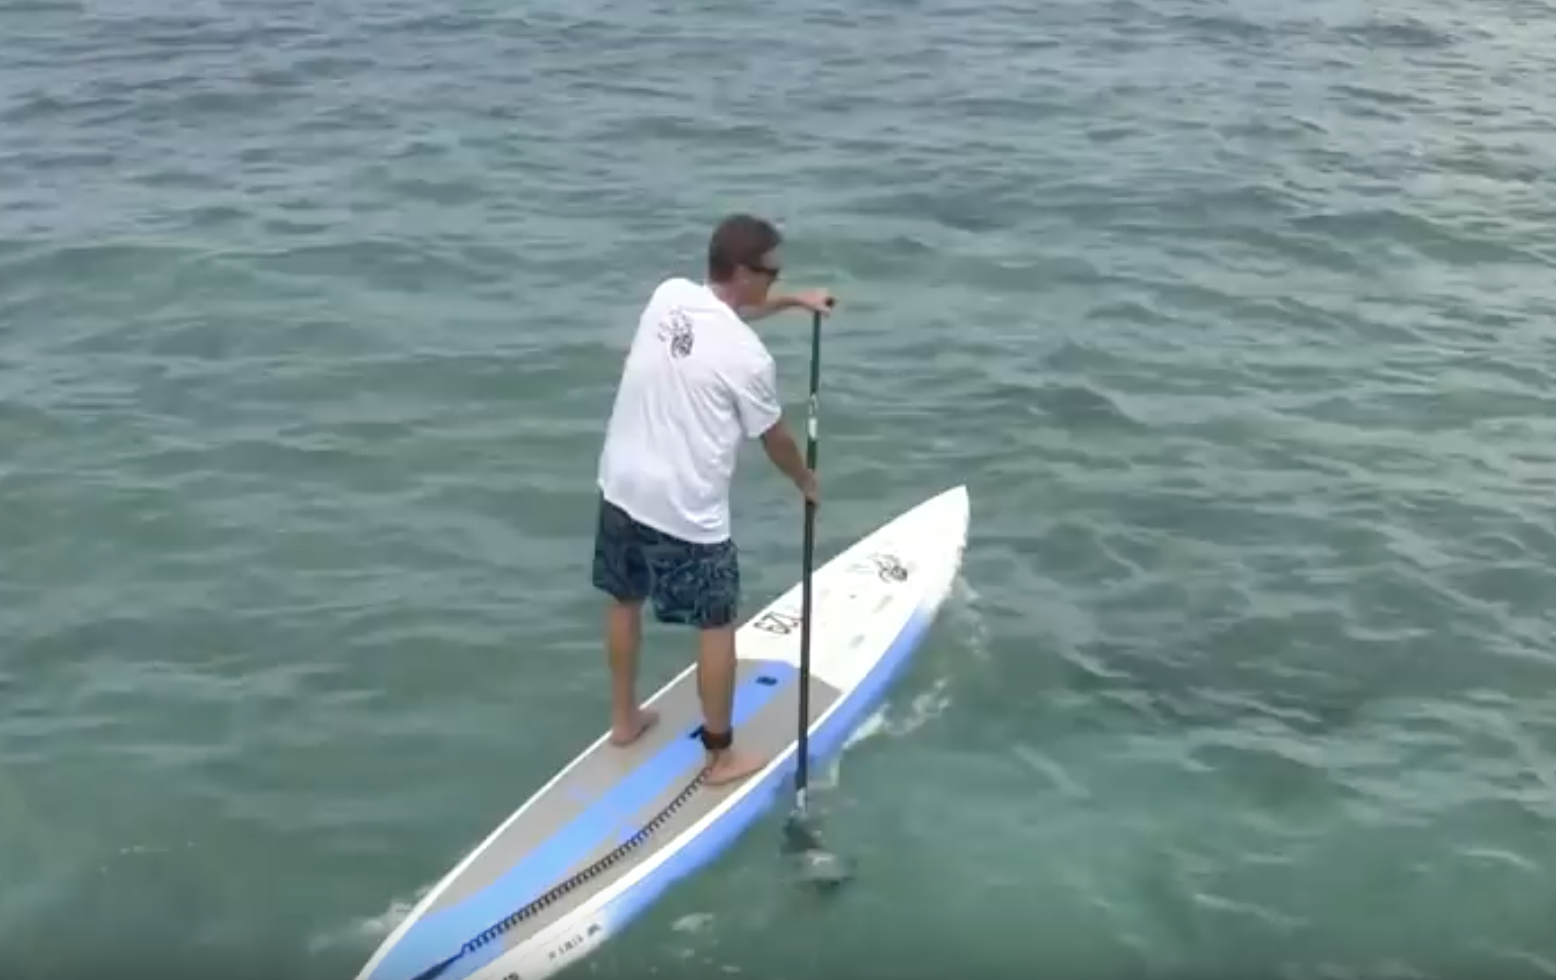 148 867 vues•31 déc. 2015 3,3 K 25 PARTAGER ENREGISTRER blueplanetsurf 18,1 k abonnés S'ABONNER Stand Up Paddle tips: using the blade andgle, stroke path and shaft angle to make the board go in a straight line. Tips: 1) Blade angle: angle the blade slightly towards you 2) Shaft angle: Hold the paddle shaft upright and perpendicular to the water 3) Stroke path: Start the stroke forward and a bit away from the rail and end it next to your feet close to the rail For more Standup Paddleboarding tips, please watch this SUP tips playlist: https://www.youtube.com/playlist?list... Please give us a thumbs up and subscribe to the blueplanetsurf youtube channel, we post new SUP related videos as well as Hawaii and lifestyle videos on a weekly basis. Aloha! Auteur des sous-titres (Espagnol) ThisIsJustAndy Auteur des sous-titres (Anglais) ThisIsJustAndy Catégorie Sport MOINS 50 commentaires TRIER PAR Arthur Paulus Ajouter un commentaire public... Ivan Kovacevic Épinglé par blueplanetsurf Ivan Kovacevic il y a 2 ans Hi...thank you for video it help me a lot but I have problem. When I paddle on my left side I go generaly straight but when I paddle on my right side, I go left very very fast. I was doing everything like on my left side but still does not help, I go left to much. Can you help me with advice why is that happening? Thank you very much. All the best. 2 blueplanetsurf RÉPONDRE Afficher 2 réponses de blueplanetsurf et d'autres personnes Adam J. Story, DC Adam J. Story, DC il y a 6 mois That was extremely helpful. Thank you very much. I'm loving my SUP! 3 blueplanetsurf RÉPONDRE Afficher la réponse de blueplanetsurf superbford superbford il y a 2 ans This is very well explained. Thank you. 3 RÉPONDRE SSshirazZZ il y a 3 ans nice, straightforward explanation. thanks! 5 RÉPONDRE Michelle Espinoza il y a 1 an Looking forward to finally getting back on the water this week and following your tips! 1 RÉPONDRE Afficher la réponse de blueplanetsurf Watercourse Wanderer il y a 5 mois Great tips. Great video! Nicely articulated! Awesome visual and verbal instruction. Great video all-around. The perfect amount of instruction. Very clear. Just perfect. Thanks! :-) 2 RÉPONDRE Afficher la réponse de blueplanetsurf Jing Wang il y a 2 ans Thank you so much. I was wondering why could not go straight. Mystery solved, thank you! 1 RÉPONDRE Afficher la réponse de blueplanetsurf Steven Love il y a 3 ans Can't wait to get back out tomorrow and just concentrate on your tips......as I have a tendency on my right side to go left much quicker than I want. (I have even added a short "trim" tab on the starboard side of my fin to compensate). As I was recently told...fix your stroke....don't try and compensate by modifying your equipment :)...... I love your tip about noting which side of the paddle you are looking through to determine if your paddle shaft is straight. 6 RÉPONDRE Afficher 2 réponses de blueplanetsurf et d'autres personnes Matt Johnson il y a 3 ans Cheers, thanks 1 RÉPONDRE Michael Kehler il y a 11 mois Can't wait to get my board and join you out there. 1 RÉPONDRE Afficher la réponse de blueplanetsurf g sell il y a 1 an Now I know...🙏🏼🤙🏽 1 RÉPONDRE Afficher la réponse de blueplanetsurf Thorsten Kruse il y a 1 an very helpfull. Thank you ! 2 RÉPONDRE PolyNZian il y a 2 ans great video as always. i was trying to start from parallel waiting for an oncoming wave but found that within a couple of strokes had overturned the board. so this tip sounds like the go. will try it tonight 1 RÉPONDRE Afficher la réponse de blueplanetsurf Matej il y a 1 an Excellent video!! Very useful informations for advanced suping :) 1 RÉPONDRE Cherry Berry il y a 1 an 🤘 thanks for the advice... 1 RÉPONDRE Afficher la réponse de blueplanetsurf Tim Mellor il y a 3 ans cheers Dude 1 RÉPONDRE John Smith il y a 3 ans Good info. thanks. 1 RÉPONDRE Afficher la réponse de blueplanetsurf Kunthea Prum il y a 1 an Very useful, thank you. 1 RÉPONDRE mastodonttix il y a 1 an You can also put your weight on the side you are paddling, and tilt the board slightly on its rail, which will balance out the strokes turning effect, and then add the blade angle, you can also shift your stance slightly on the side which makes the stroke more powerful when youre paddling in an angle towards you 3 RÉPONDRE Face il y a 1 mois Thanks for a good video and tips 1 RÉPONDRE Afficher la réponse de blueplanetsurf À suivre LECTURE AUTOMATIQUE 7:26 EN COURS DE LECTURE The Basics of the Stand up Paddling Stroke With Tommy Buday SIC Maui 51 k vues 8:57 EN COURS DE LECTURE Paul Mirabel - Je me suis fait racketter Montreux Comedy Recommended for you Nouveau 5:51 EN COURS DE LECTURE Scorpions - Still Loving You - 8/31/1985 - Oakland Coliseum Stadium (Official) Scorpions on MV Recommended for you 6:31 EN COURS DE LECTURE Todd Bradley Teaches Proper Paddle Technique #1 StandUpPaddleSurf.net 181 k vues 40 EN COURS DE LECTURE SUP Tips playlist blueplanetsurf 31:08 EN COURS DE LECTURE